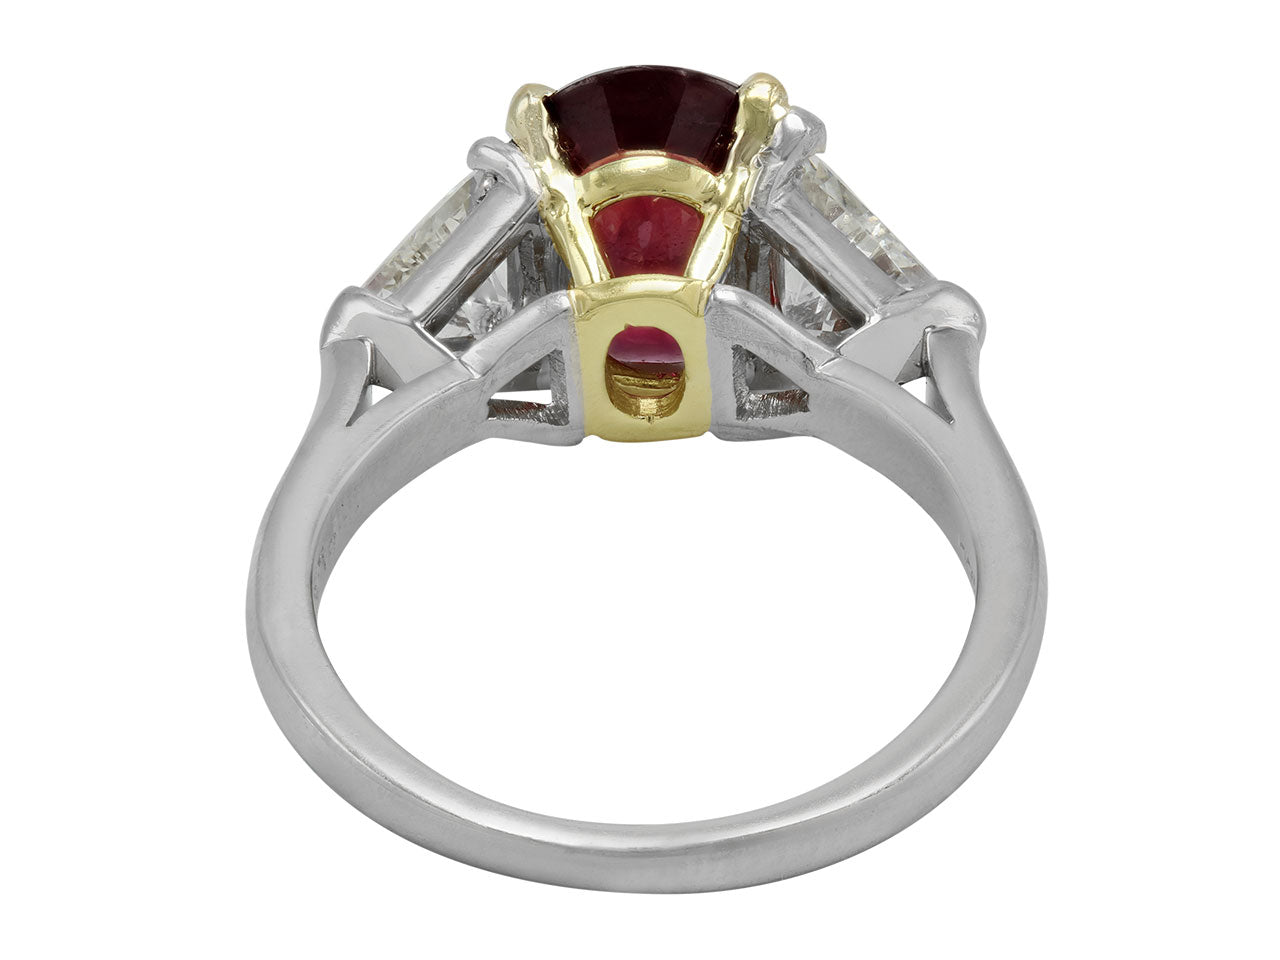 Thai Ruby, 3.49 Carat, and Diamond Ring in 18K and Platinum